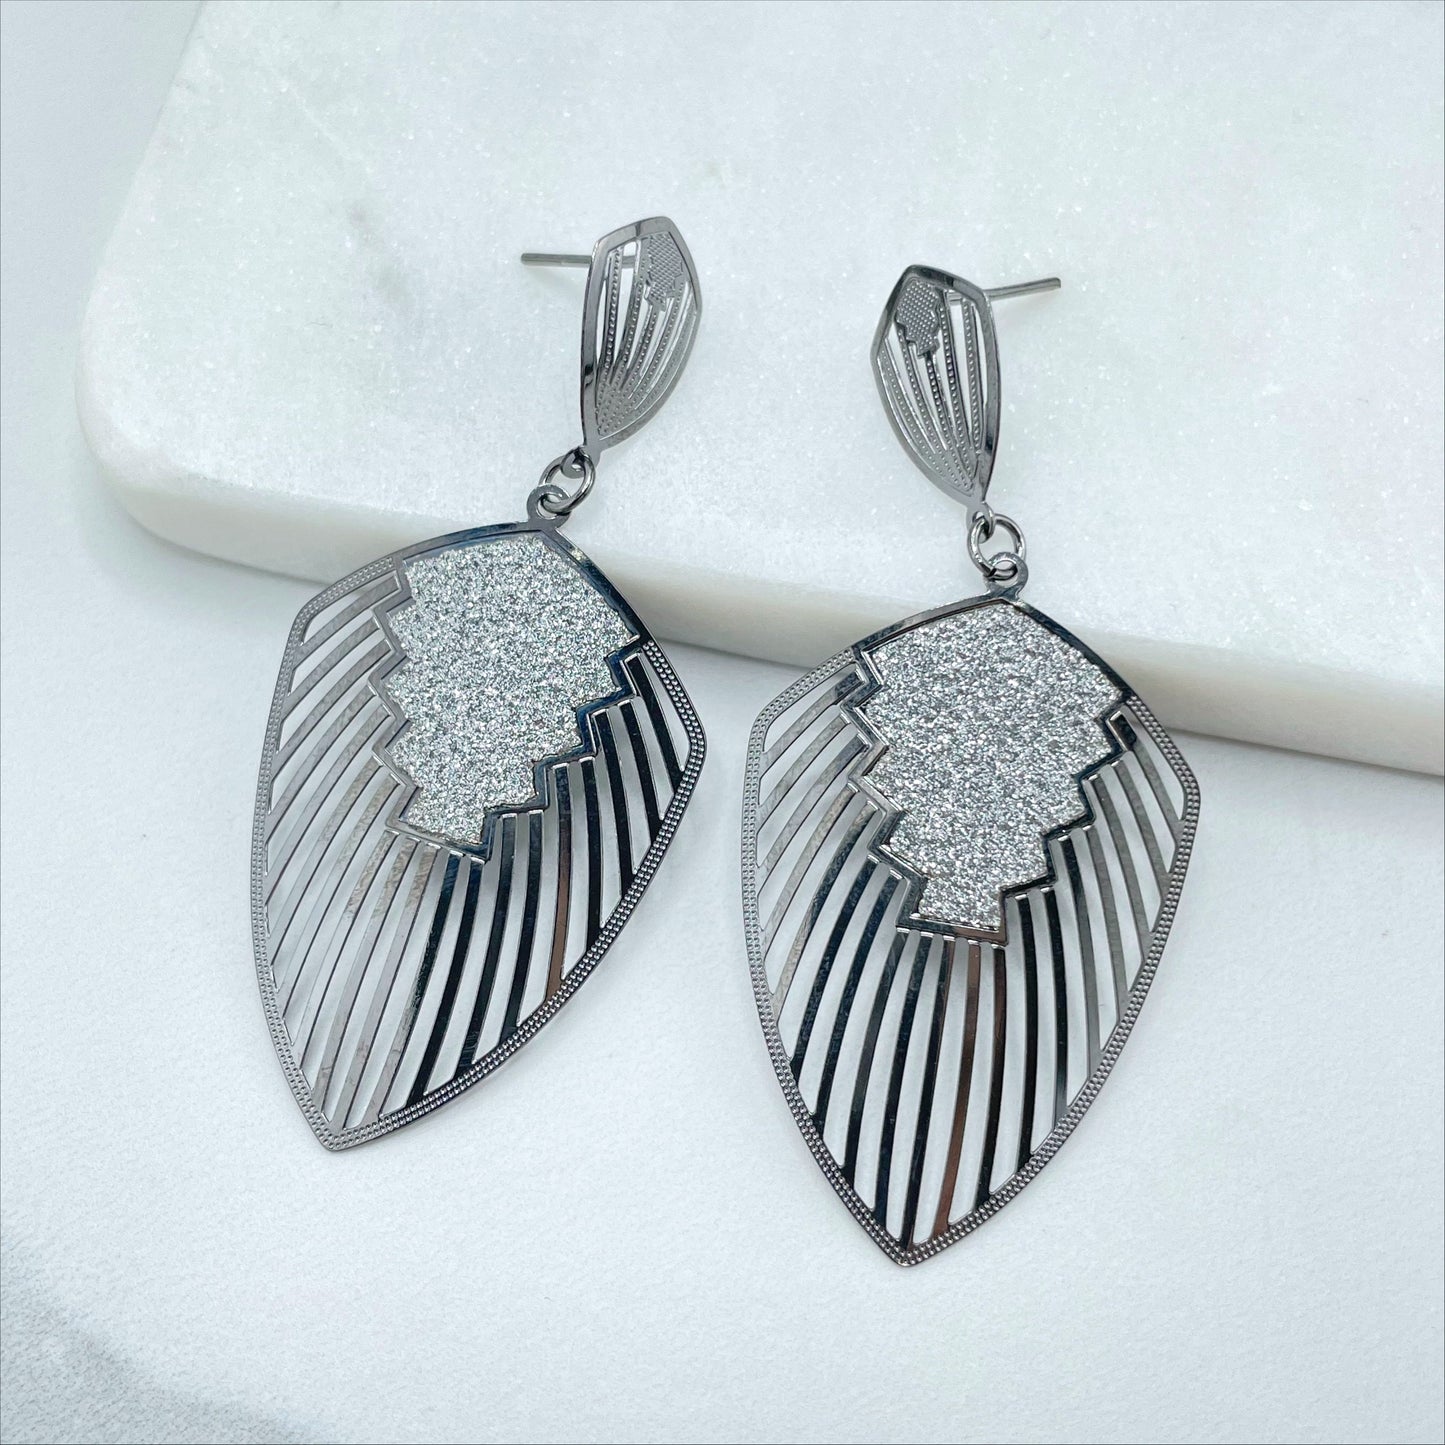 Rhodium Plated Oval Silver Shine Drop Earrings Wholesale Jewelry Making Supplies